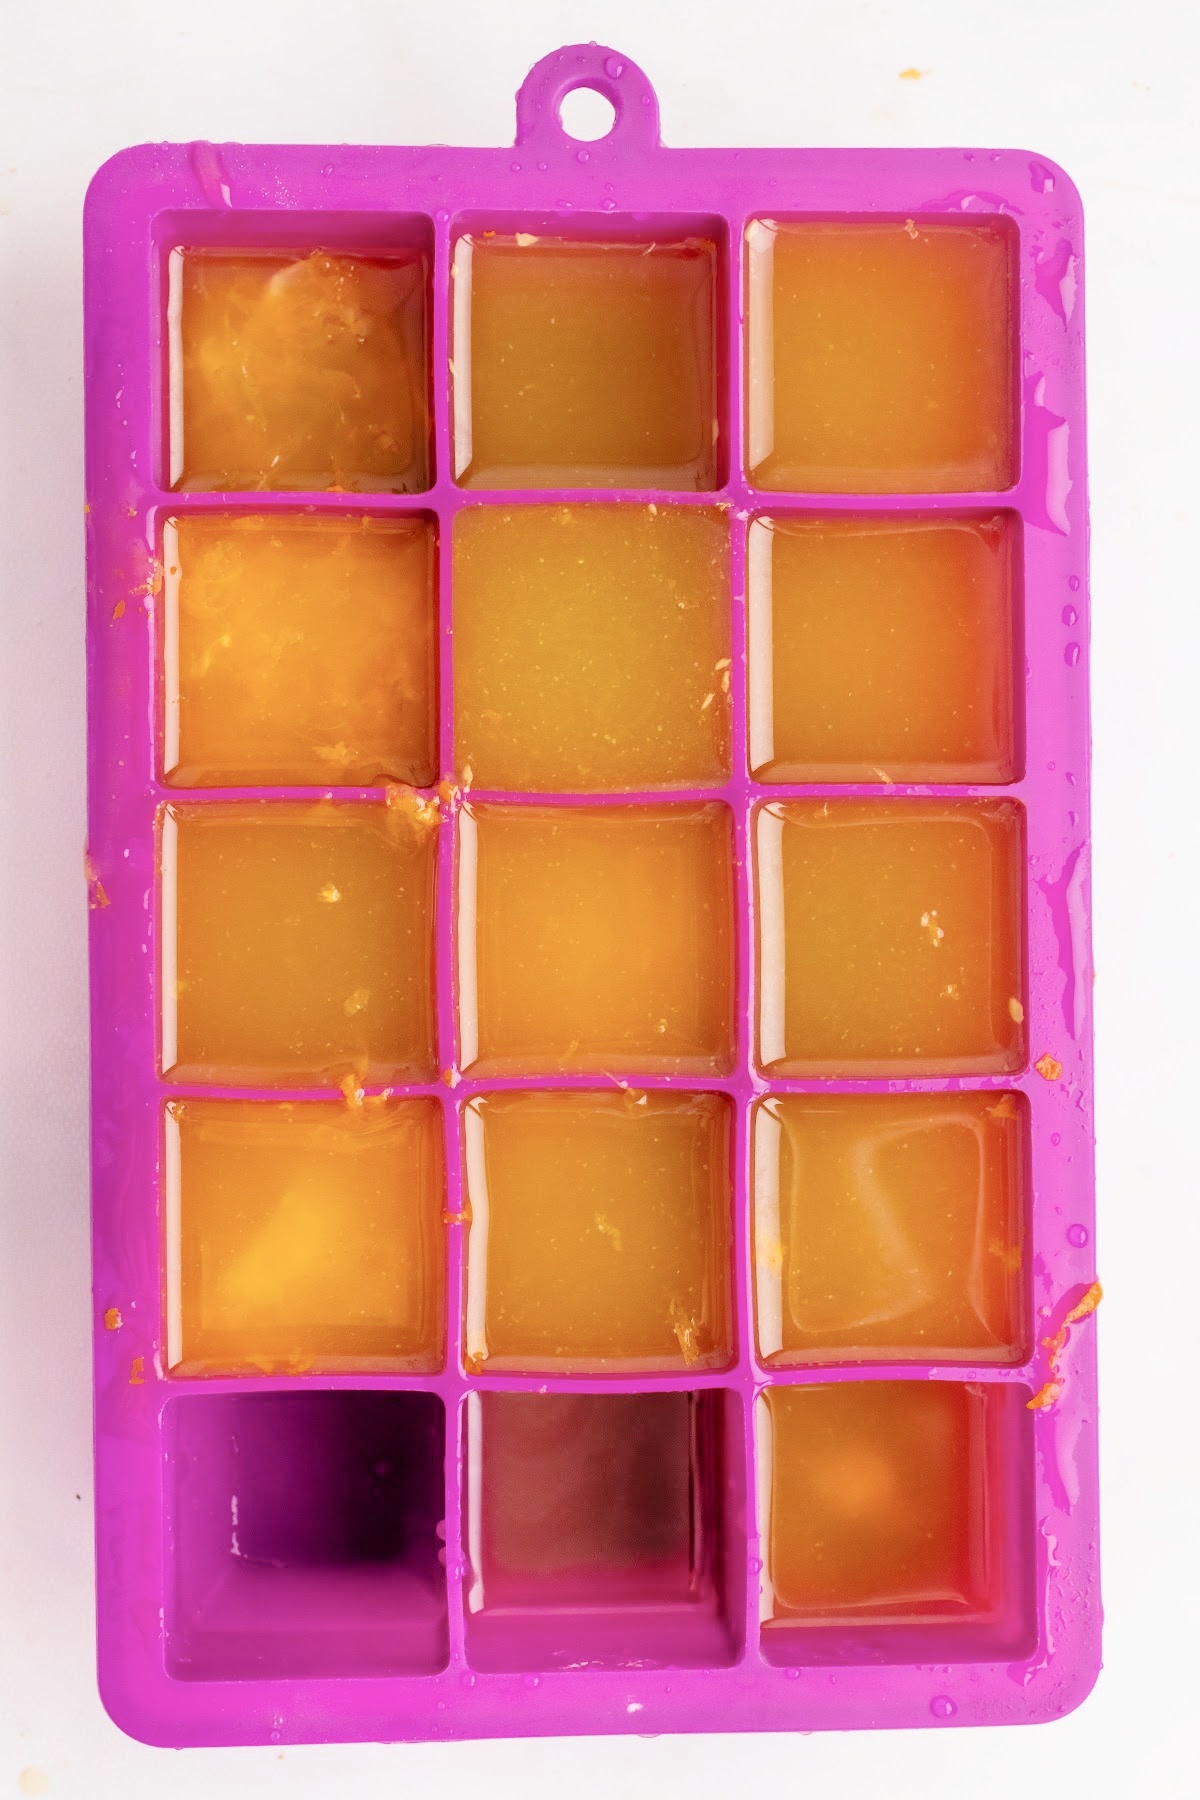 Frozen orange juice ice cubes in a pink silicone ice cube tray.